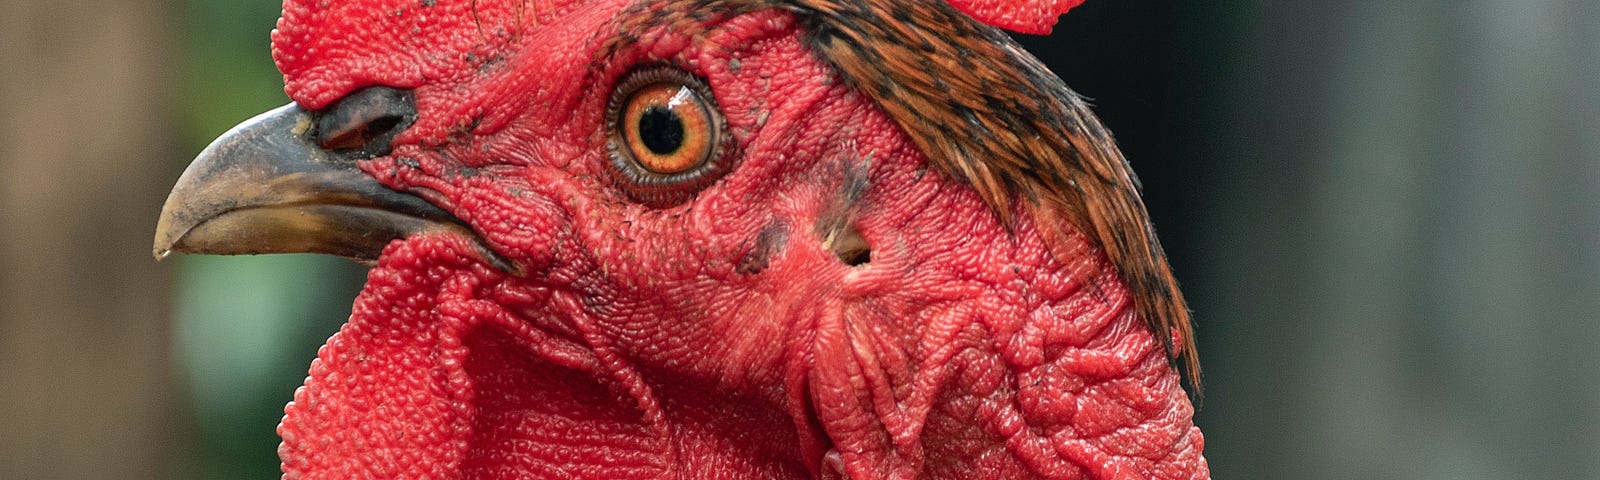 Profile of angry-looking red rooster